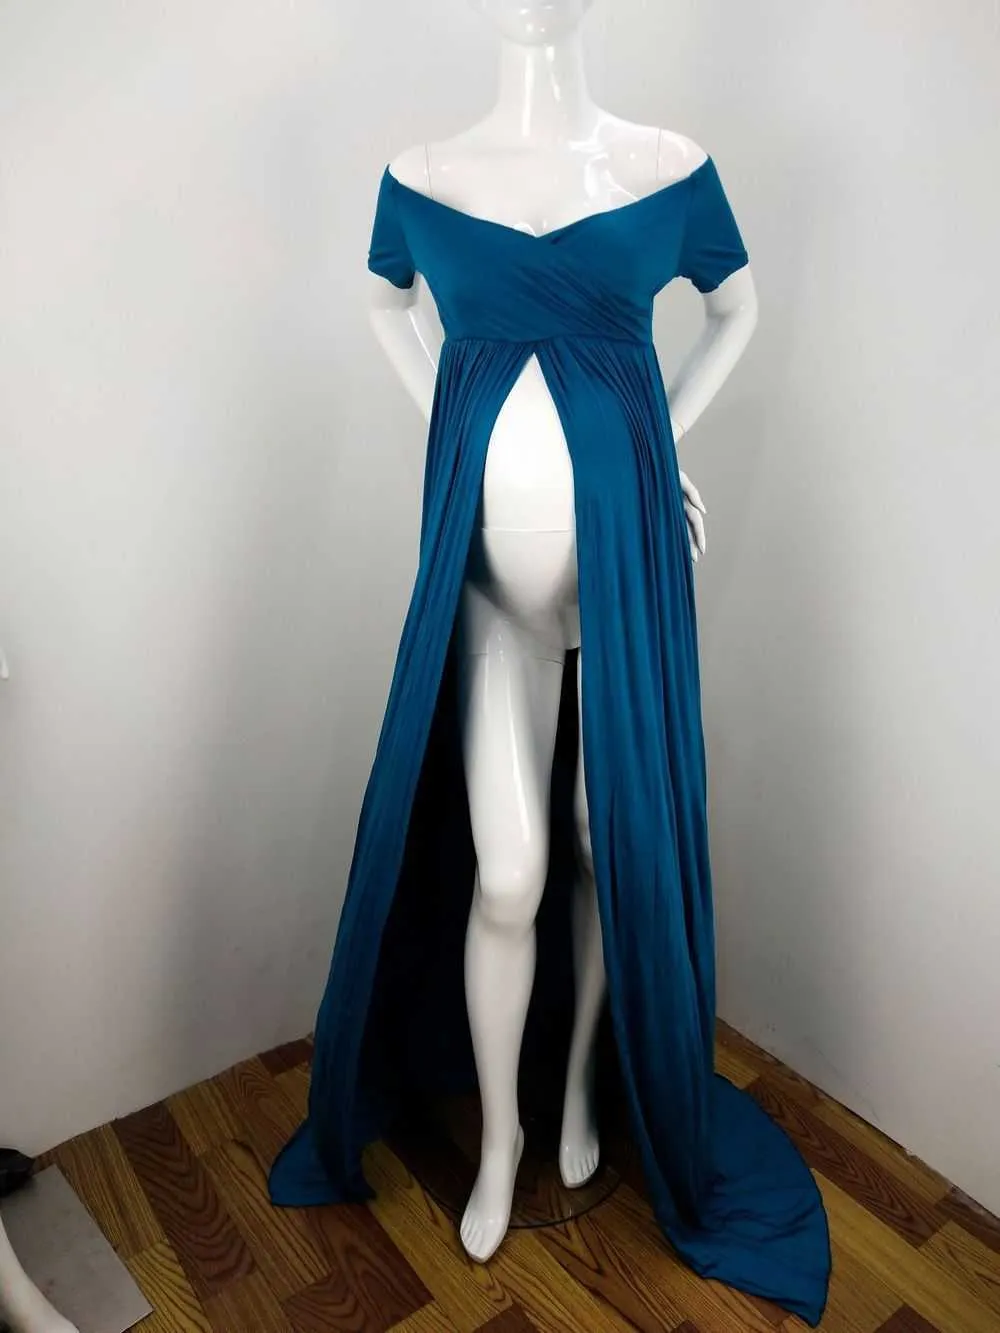 Sexy Maternity Photography Props Maternity Dresses Off Shoulder Maternity Gown For Photo Shoots 2019 New Women Pregnancy Dress (15)